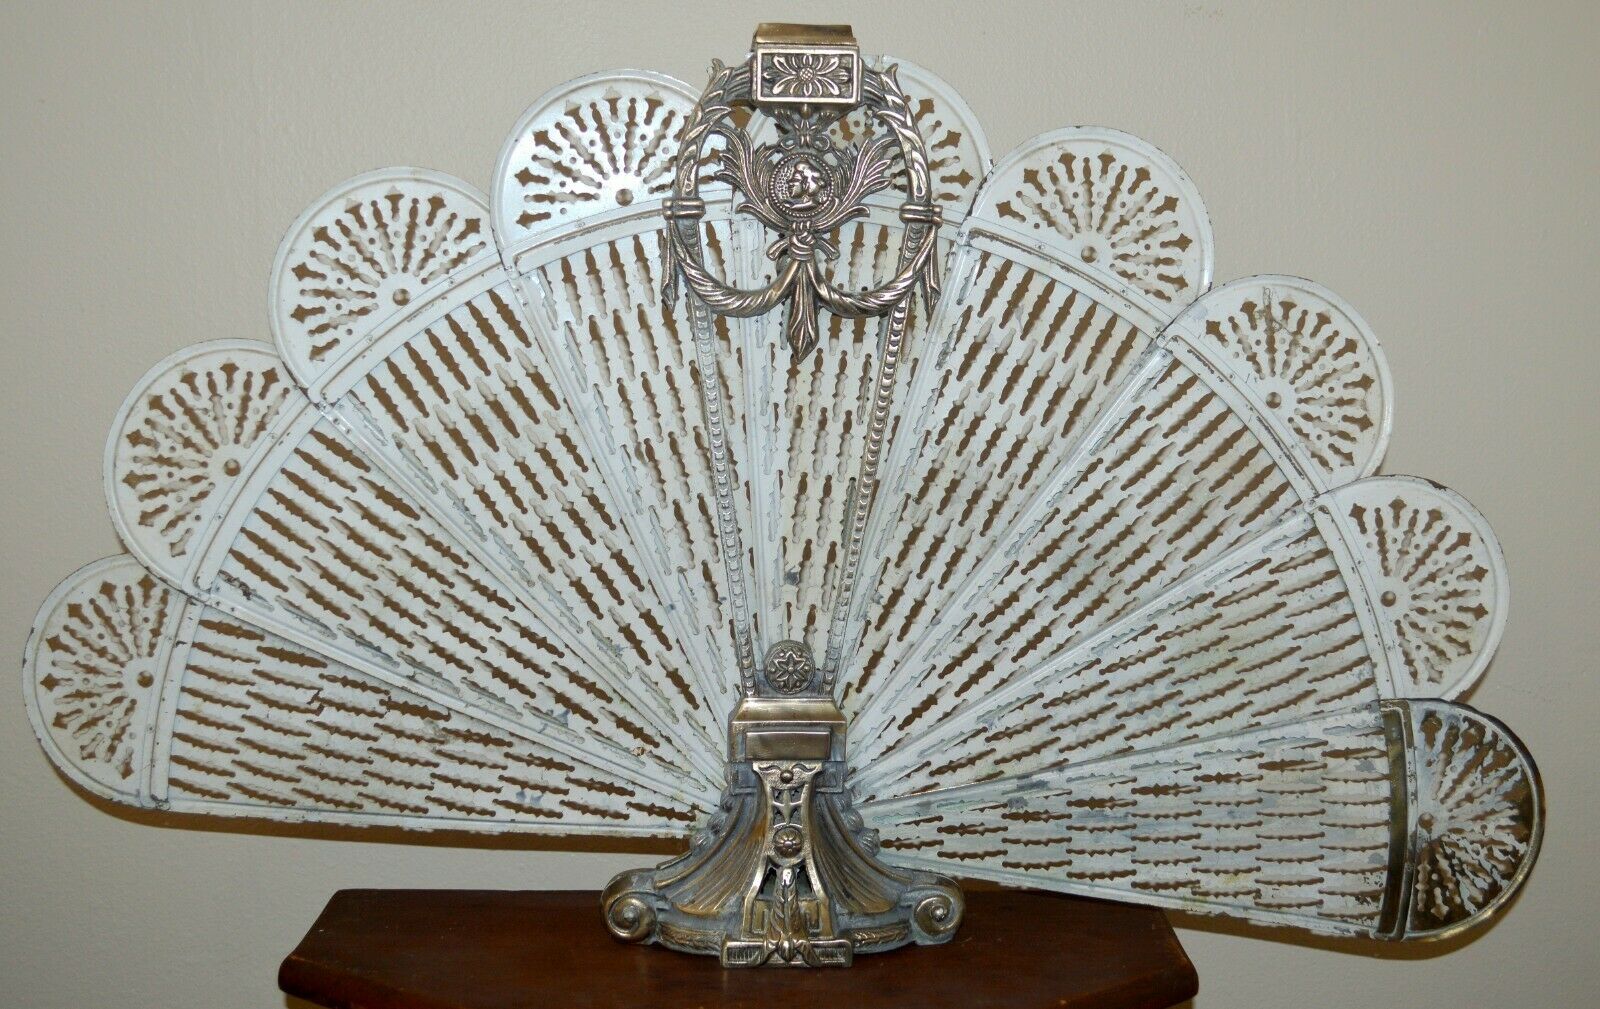 Antique Valuations: ANTIQUE BRASS ART DECO PEACOCK FOLDING FIREPLACE SCREEN COLLECTIBLE